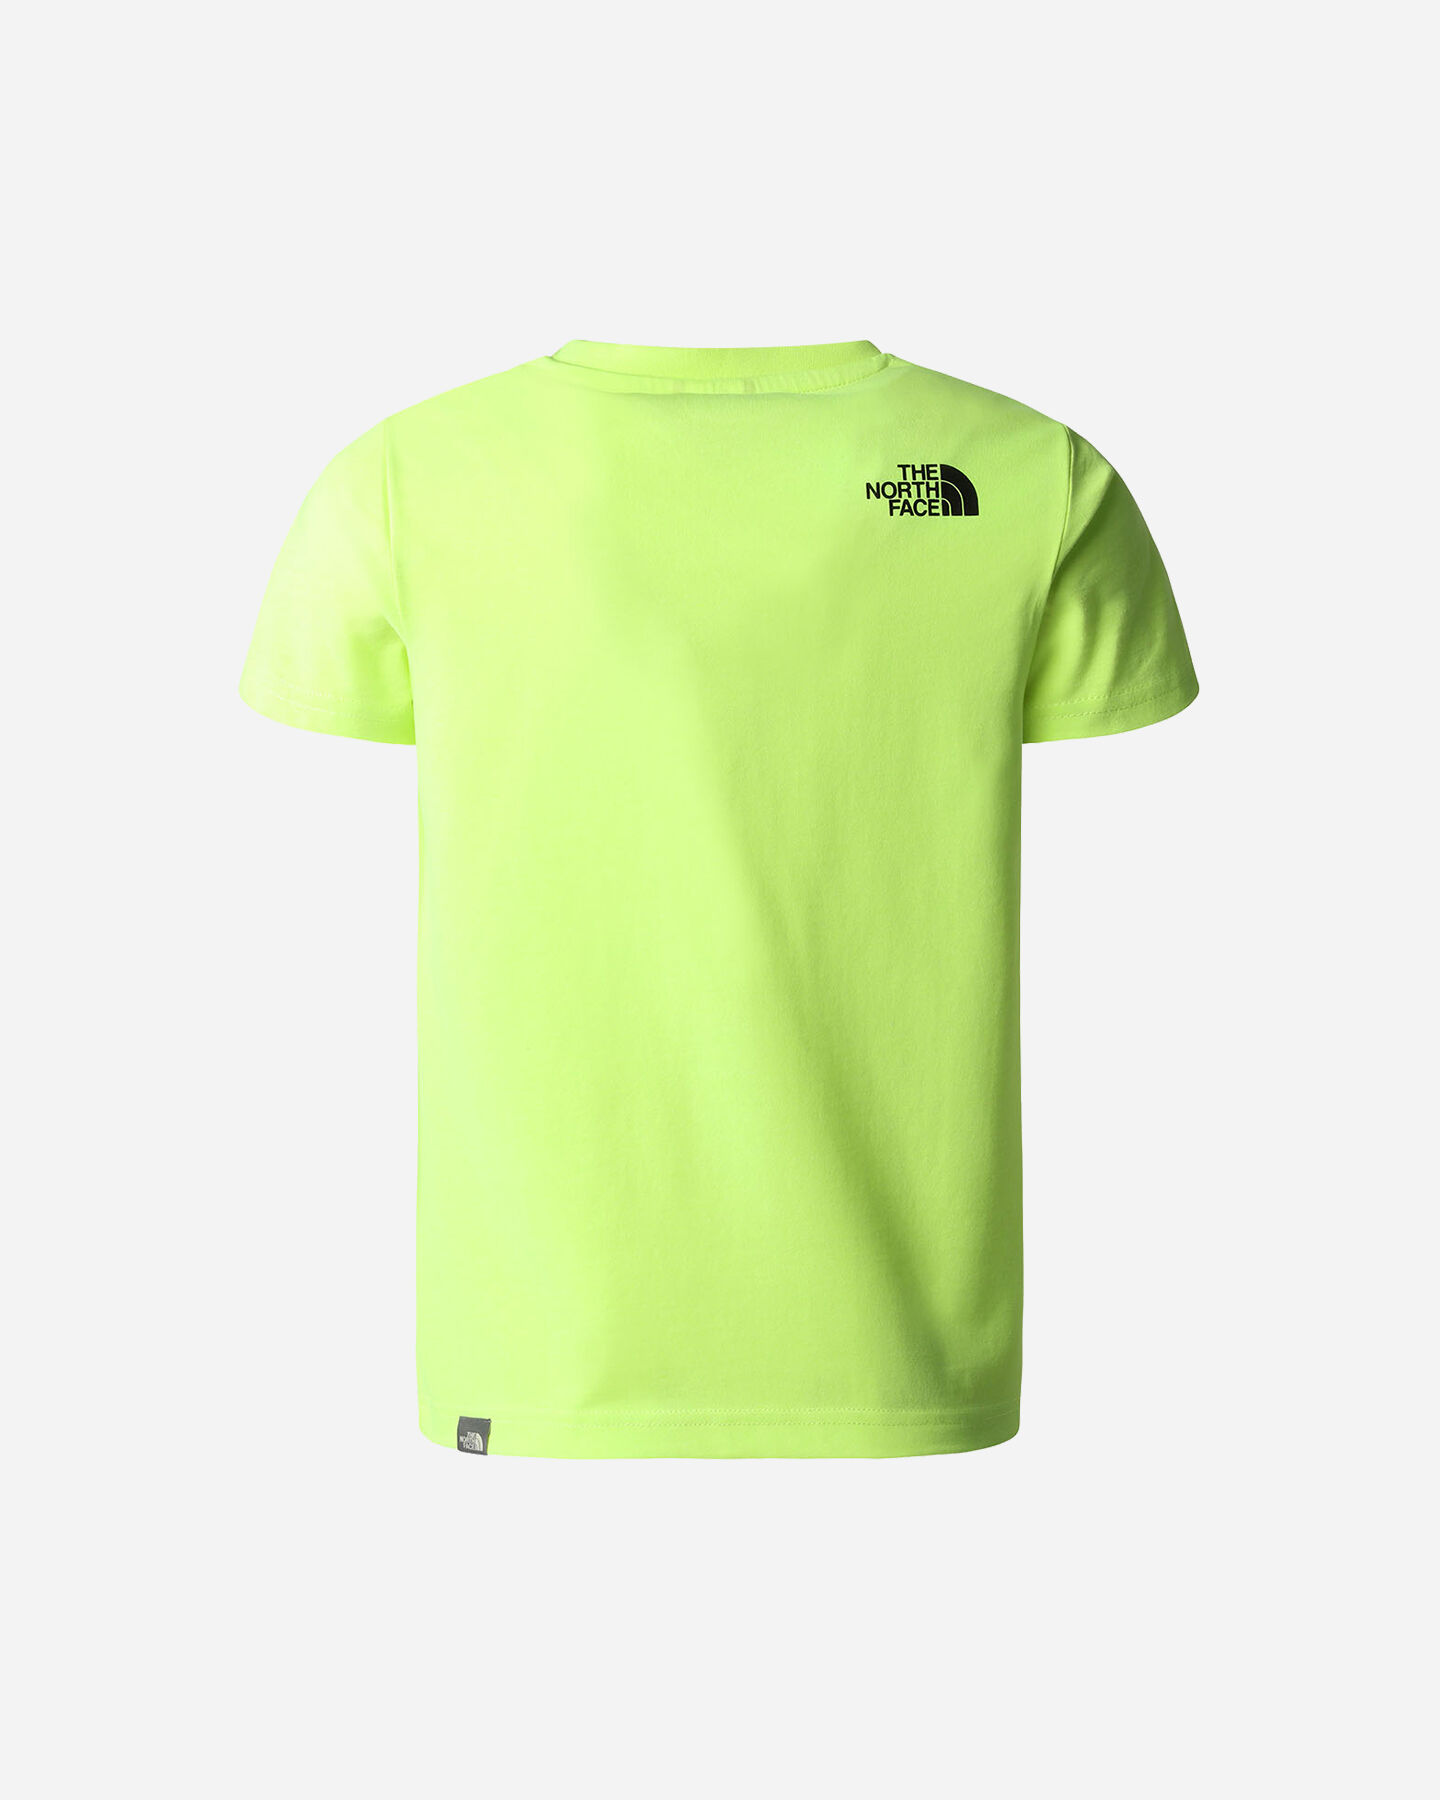  T-Shirt THE NORTH FACE REDBOX JR S5537330|8NT|S scatto 1